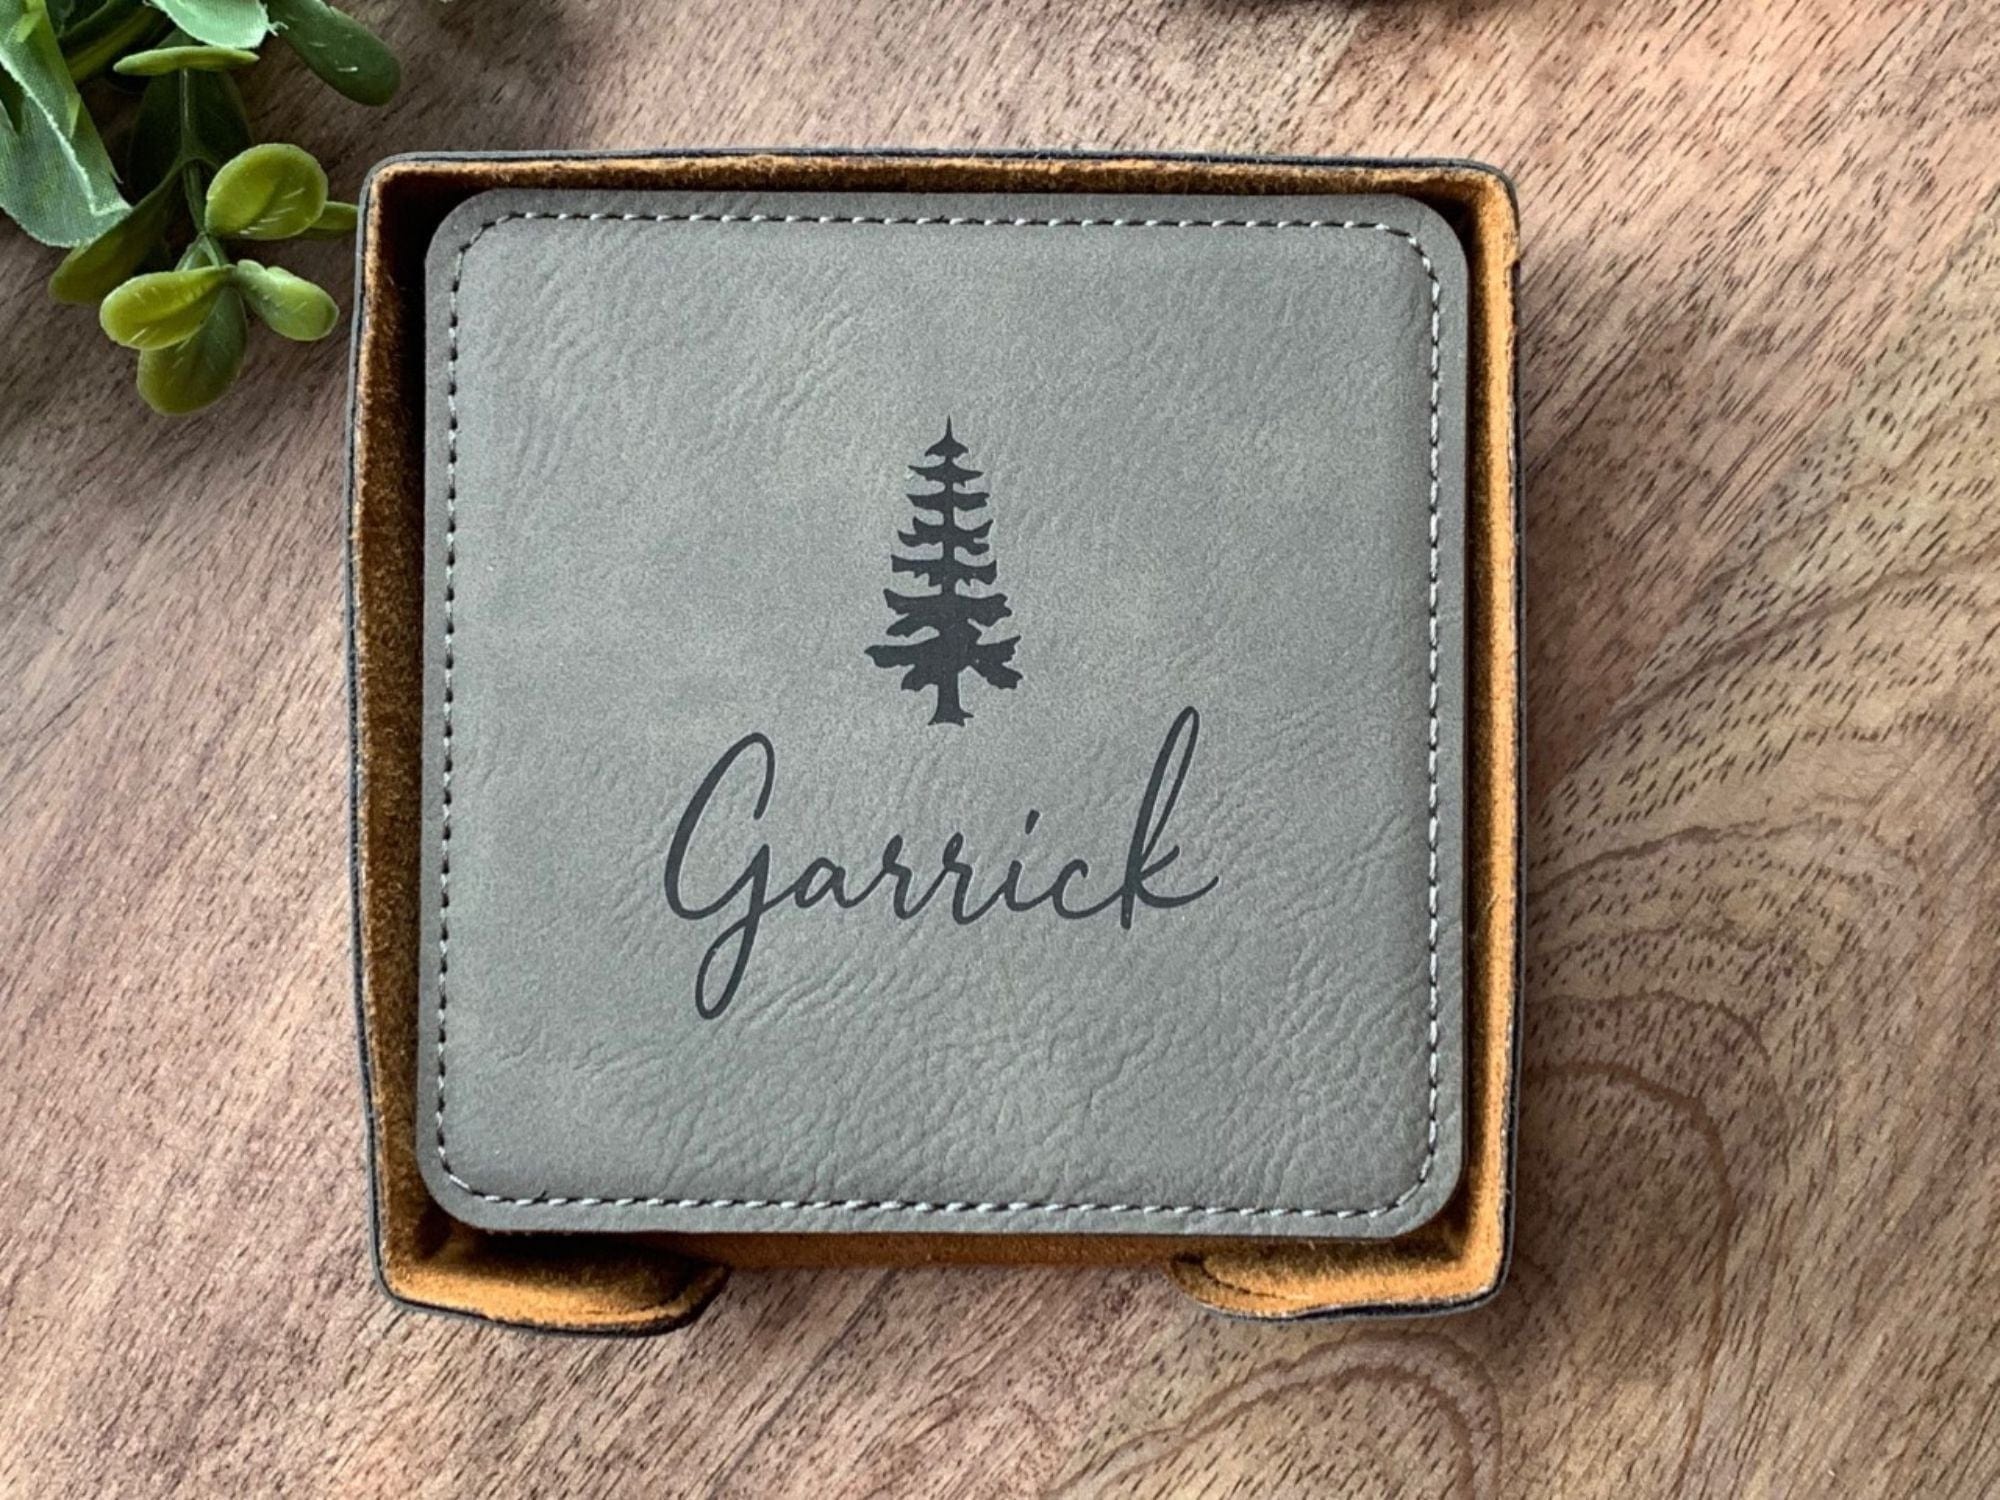 Personalized Coaster Set Engraved With Tree And Name